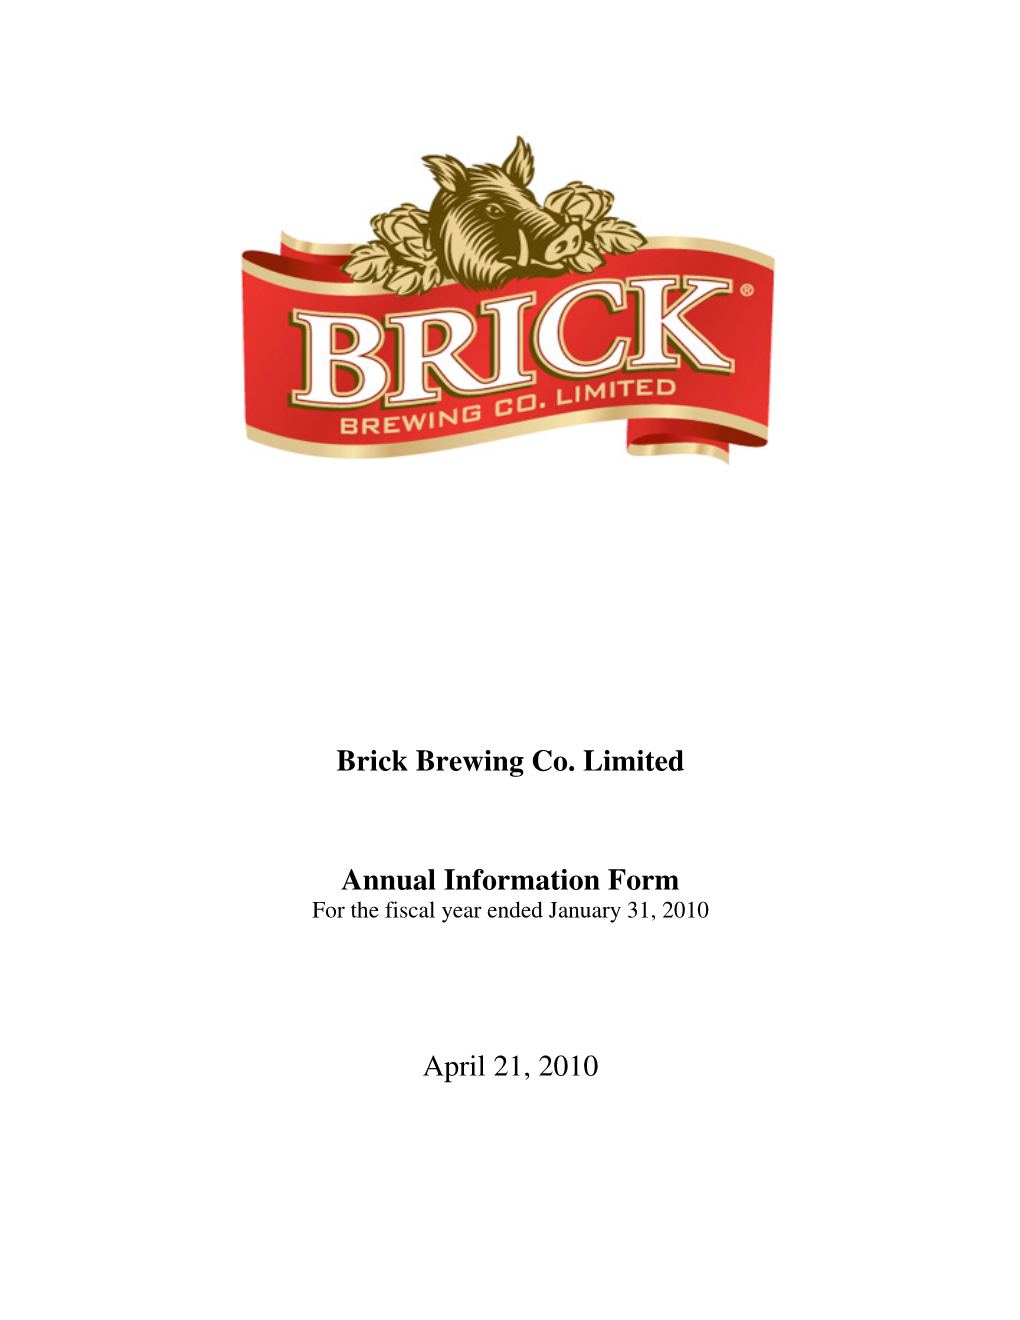 Brick Brewing Co. Limited Annual Information Form April 21, 2010